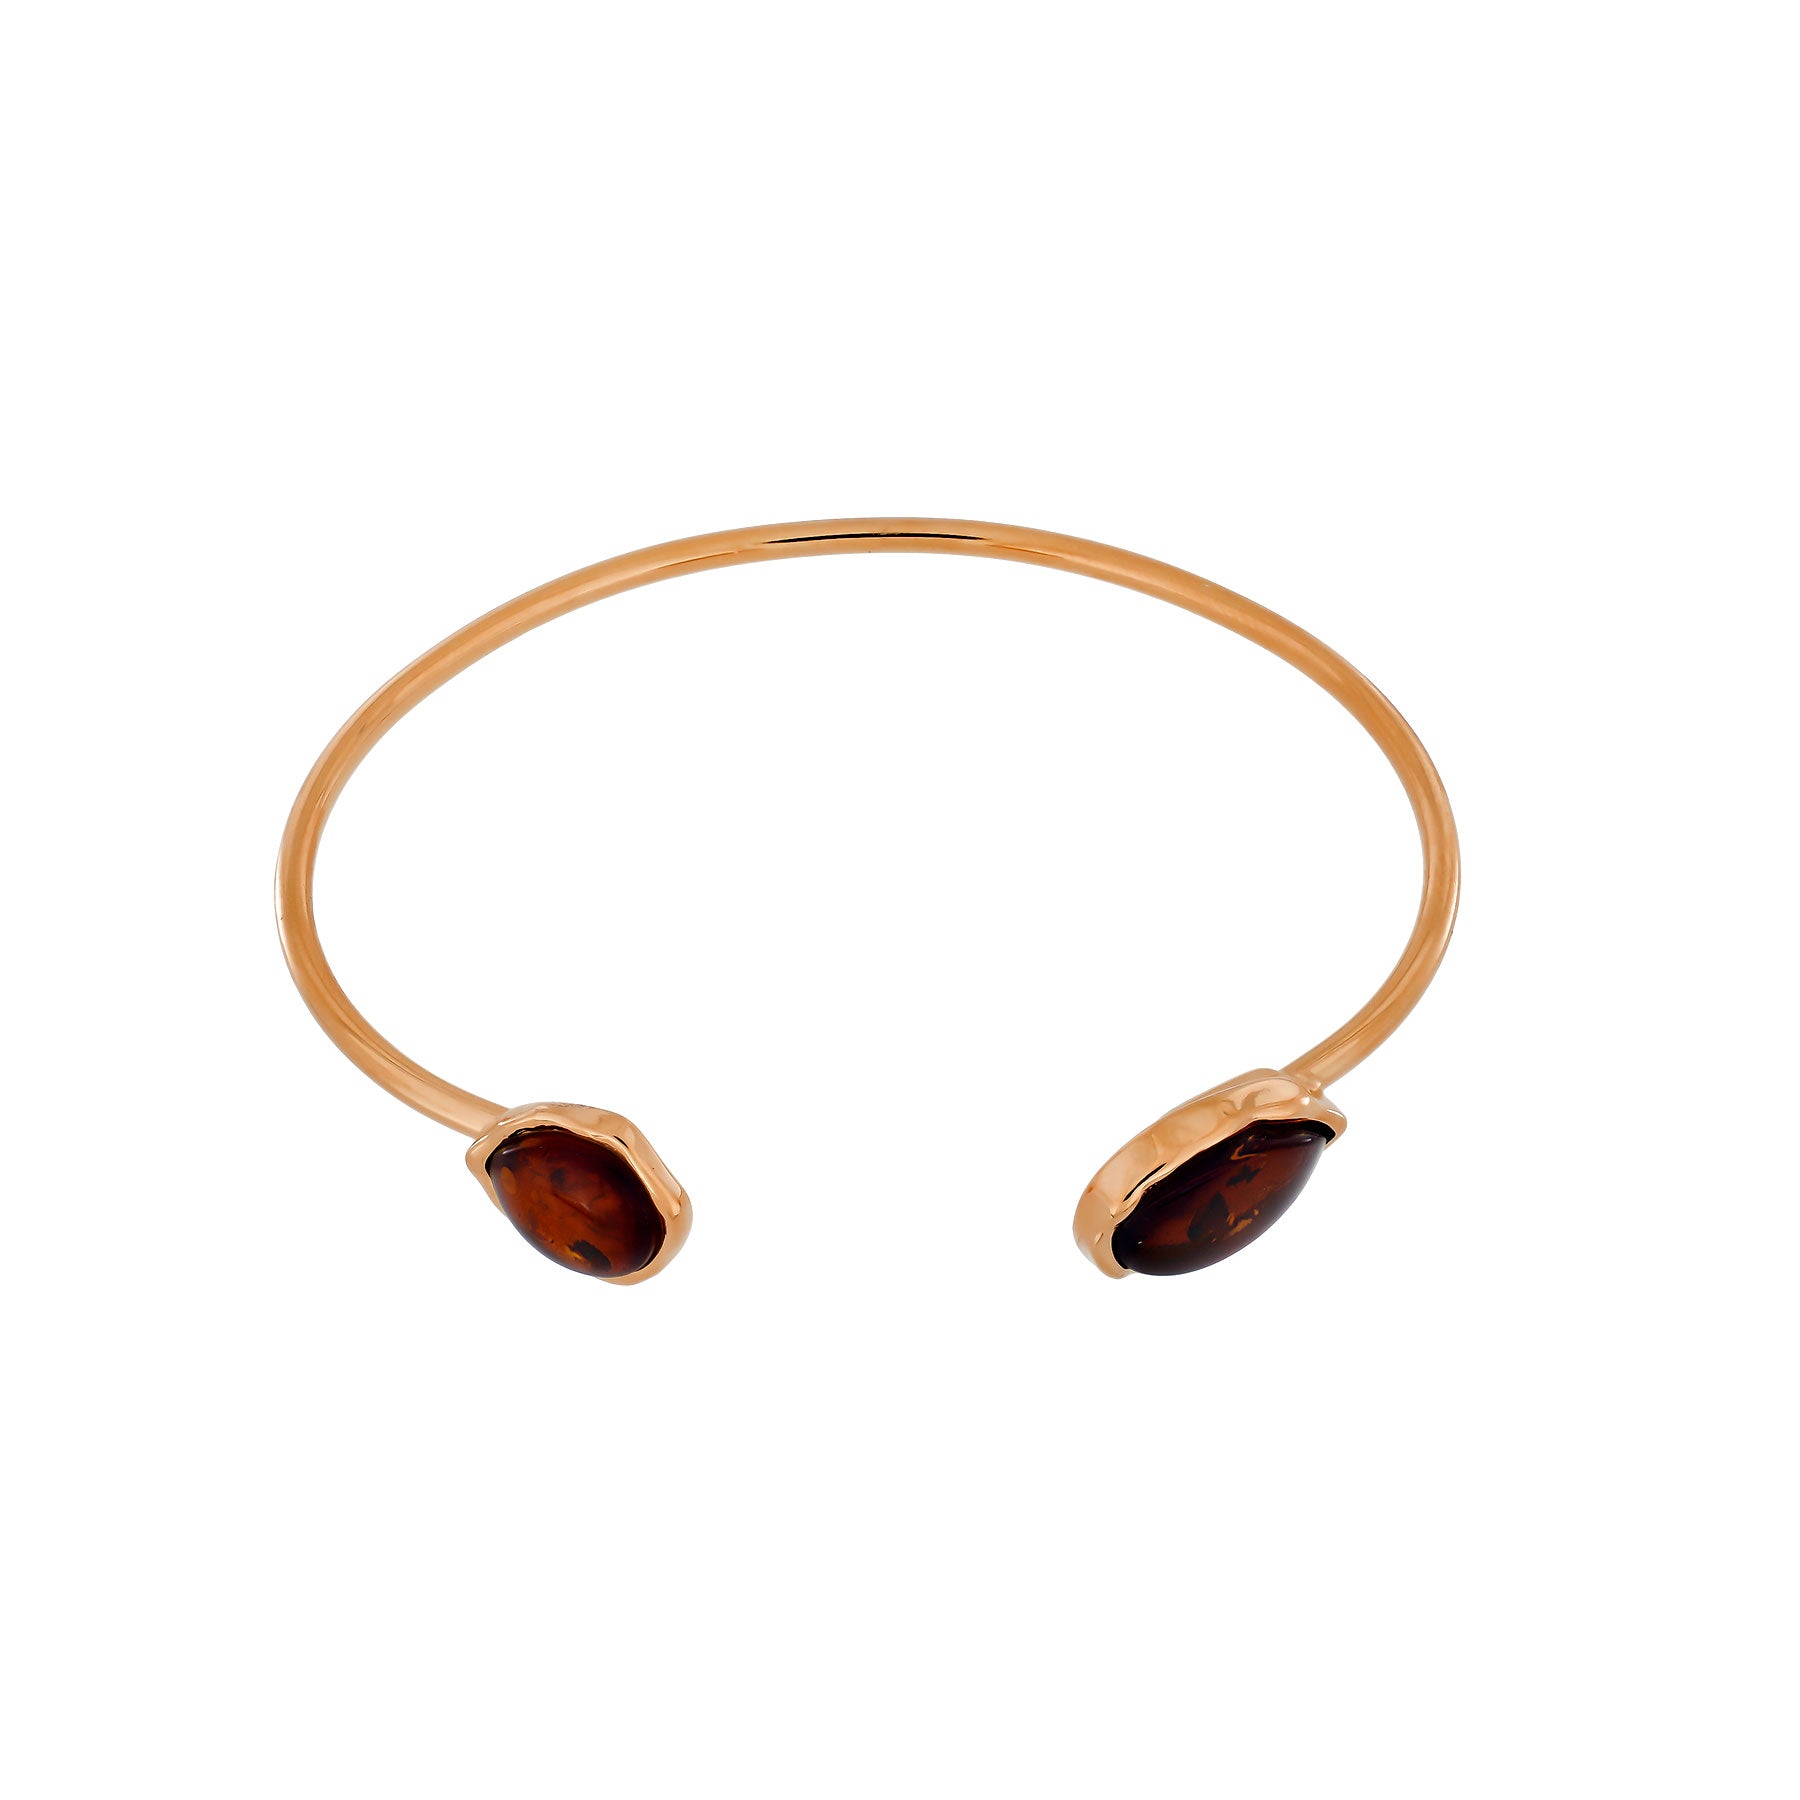 Northern Lights Baltic Amber Cuff in Rose Gold Vermeil